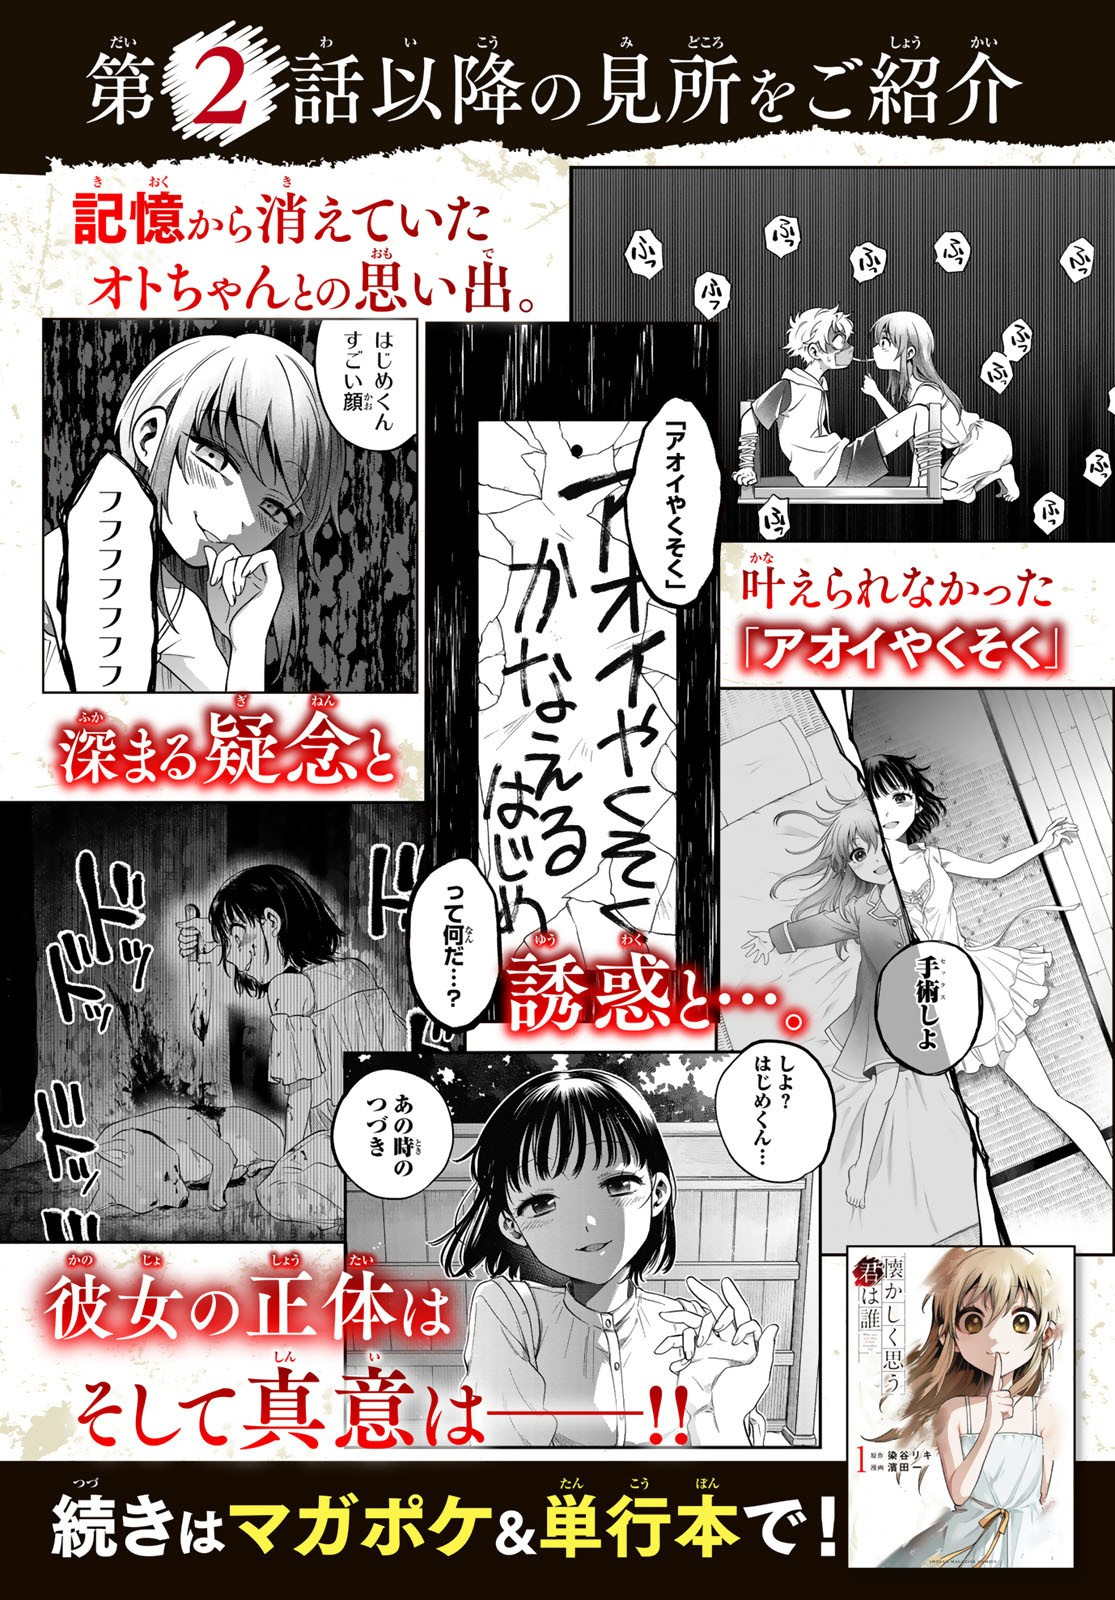 Weekly Shōnen Magazine - 週刊少年マガジン - Chapter 2024-19 - Page 609